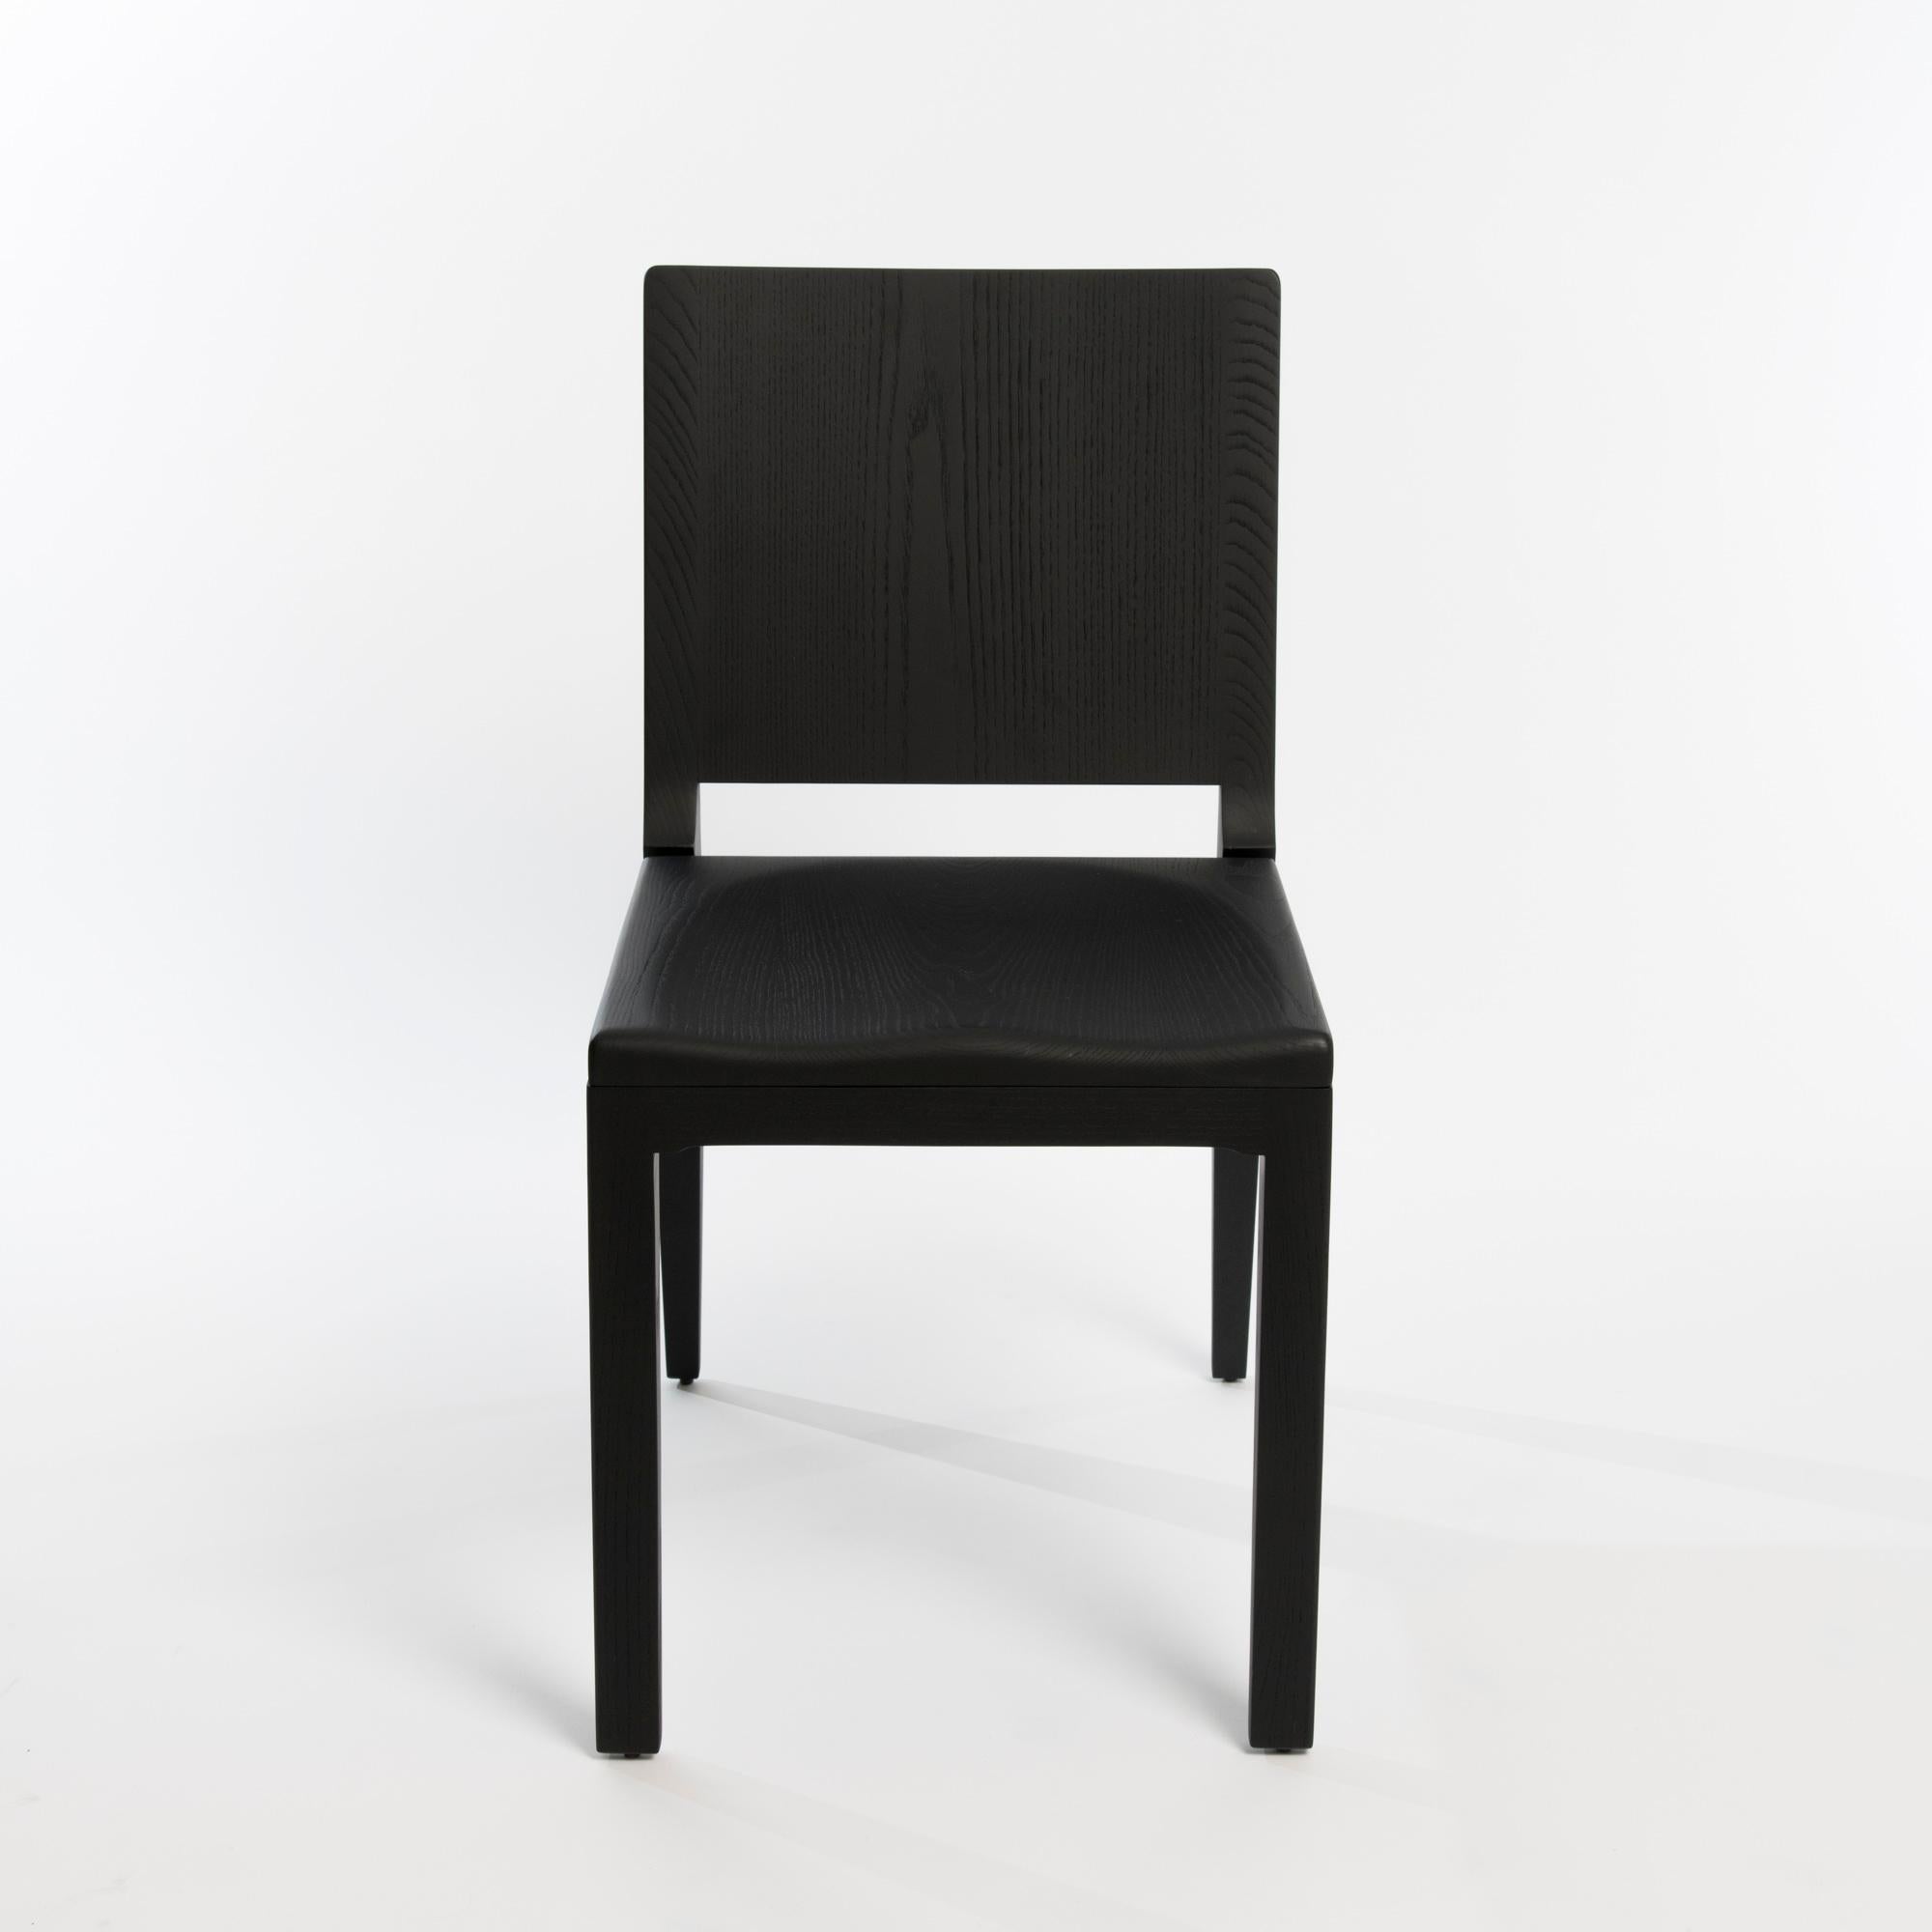 Minimal design chair by Parisian based studio mjiila. The om5.0 is a contemporary high-end chair handcrafted by skilled cabinetmaker. The curved ergonomic solid wood seat is accurately made on a CNC. Available in natural or black stained ash, matte